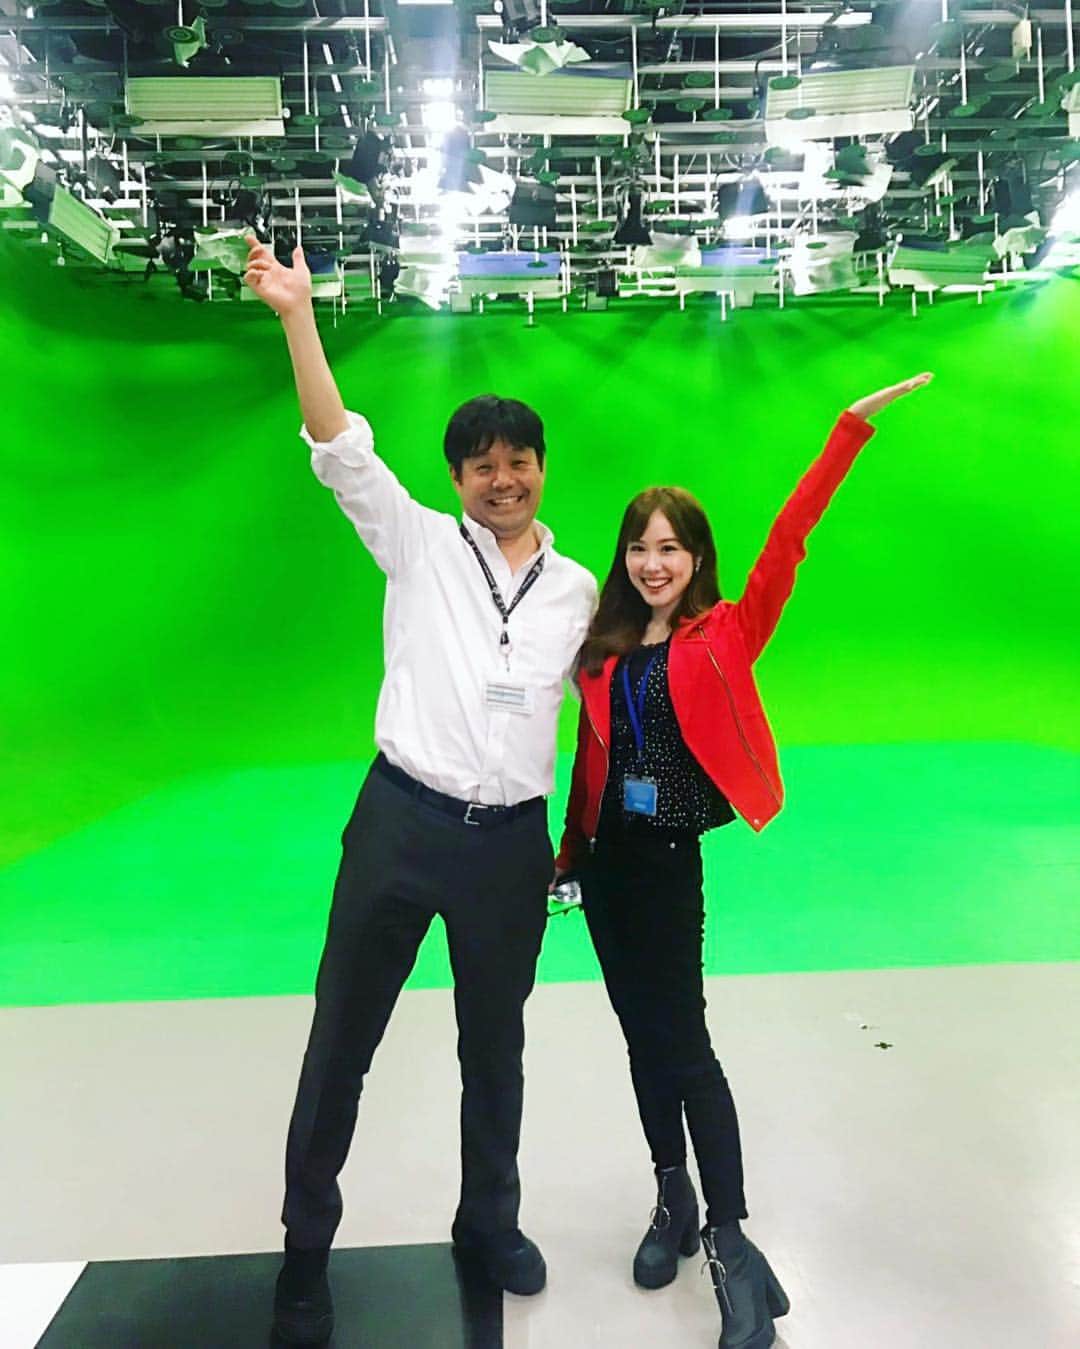 メロディー・モリタさんのインスタグラム写真 - (メロディー・モリタInstagram)「Hello from Nippon TV's iconic studios!🤗💙💚💛❤️ I had a blast spending the day with the NFL Club team, the TV program I report for when interviewing the NFL players, etc! It's currently offseason for the league, but we have some fun content coming up🙈🏈 Speaking of Oodori's NFL Club, Oodori's Kasuga-san revealed on live TV yesterday that he is going to marry his gf of 11 years‼️😭🎉🔔✨ (He was actually here at the studio as well filming for another show, so I was thrilled when I found out!) Both Kasuga-san and Wakabayashi-san are literally the most down-to-earth and caring people I've met in this industry, so I couldn't hold back my tears😢 Congratulations, Kasuga-san!! Wishing you a lifetime of love & happiness!!!💖 * 現地リポーターを務めさせて頂いている、『オードリーのNFL倶楽部』（日テレ）でお世話になっている皆さんと、とても楽しい時間を過ごすことができました‼️☺️🎀✨ NFLは現在オフシーズン中なのですが、今だからできる面白い企画をスタッフさん達が進めてくれています。こちらも、どうぞお楽しみに！😆 * 『ZIP!』、『ヒルナンデス！』、『news zero』、スポーツ＆報道局などなど、色々なスタジオにもお邪魔させて頂きました🌟✨ * そして、昨日ご結婚されることを発表されましたオードリーの春日さんも、別番組の収録のためスタジオにいらっしゃいました!!😆 オードリーのお二人はon and off cameraでとってもとっても素敵な方々ですので心から嬉しいです😭😭😭👏 春日さん、本当におめでとうございます‼️‼️どうぞ末長くお幸せに!!!!💖 #MelodeeinJapan #日テレ #日本テレビ #NipponTV #NFLclub #オードリーのNFL倶楽部 #ZIP #newszero #ヒルナンデス」4月19日 14時13分 - melodeemorita